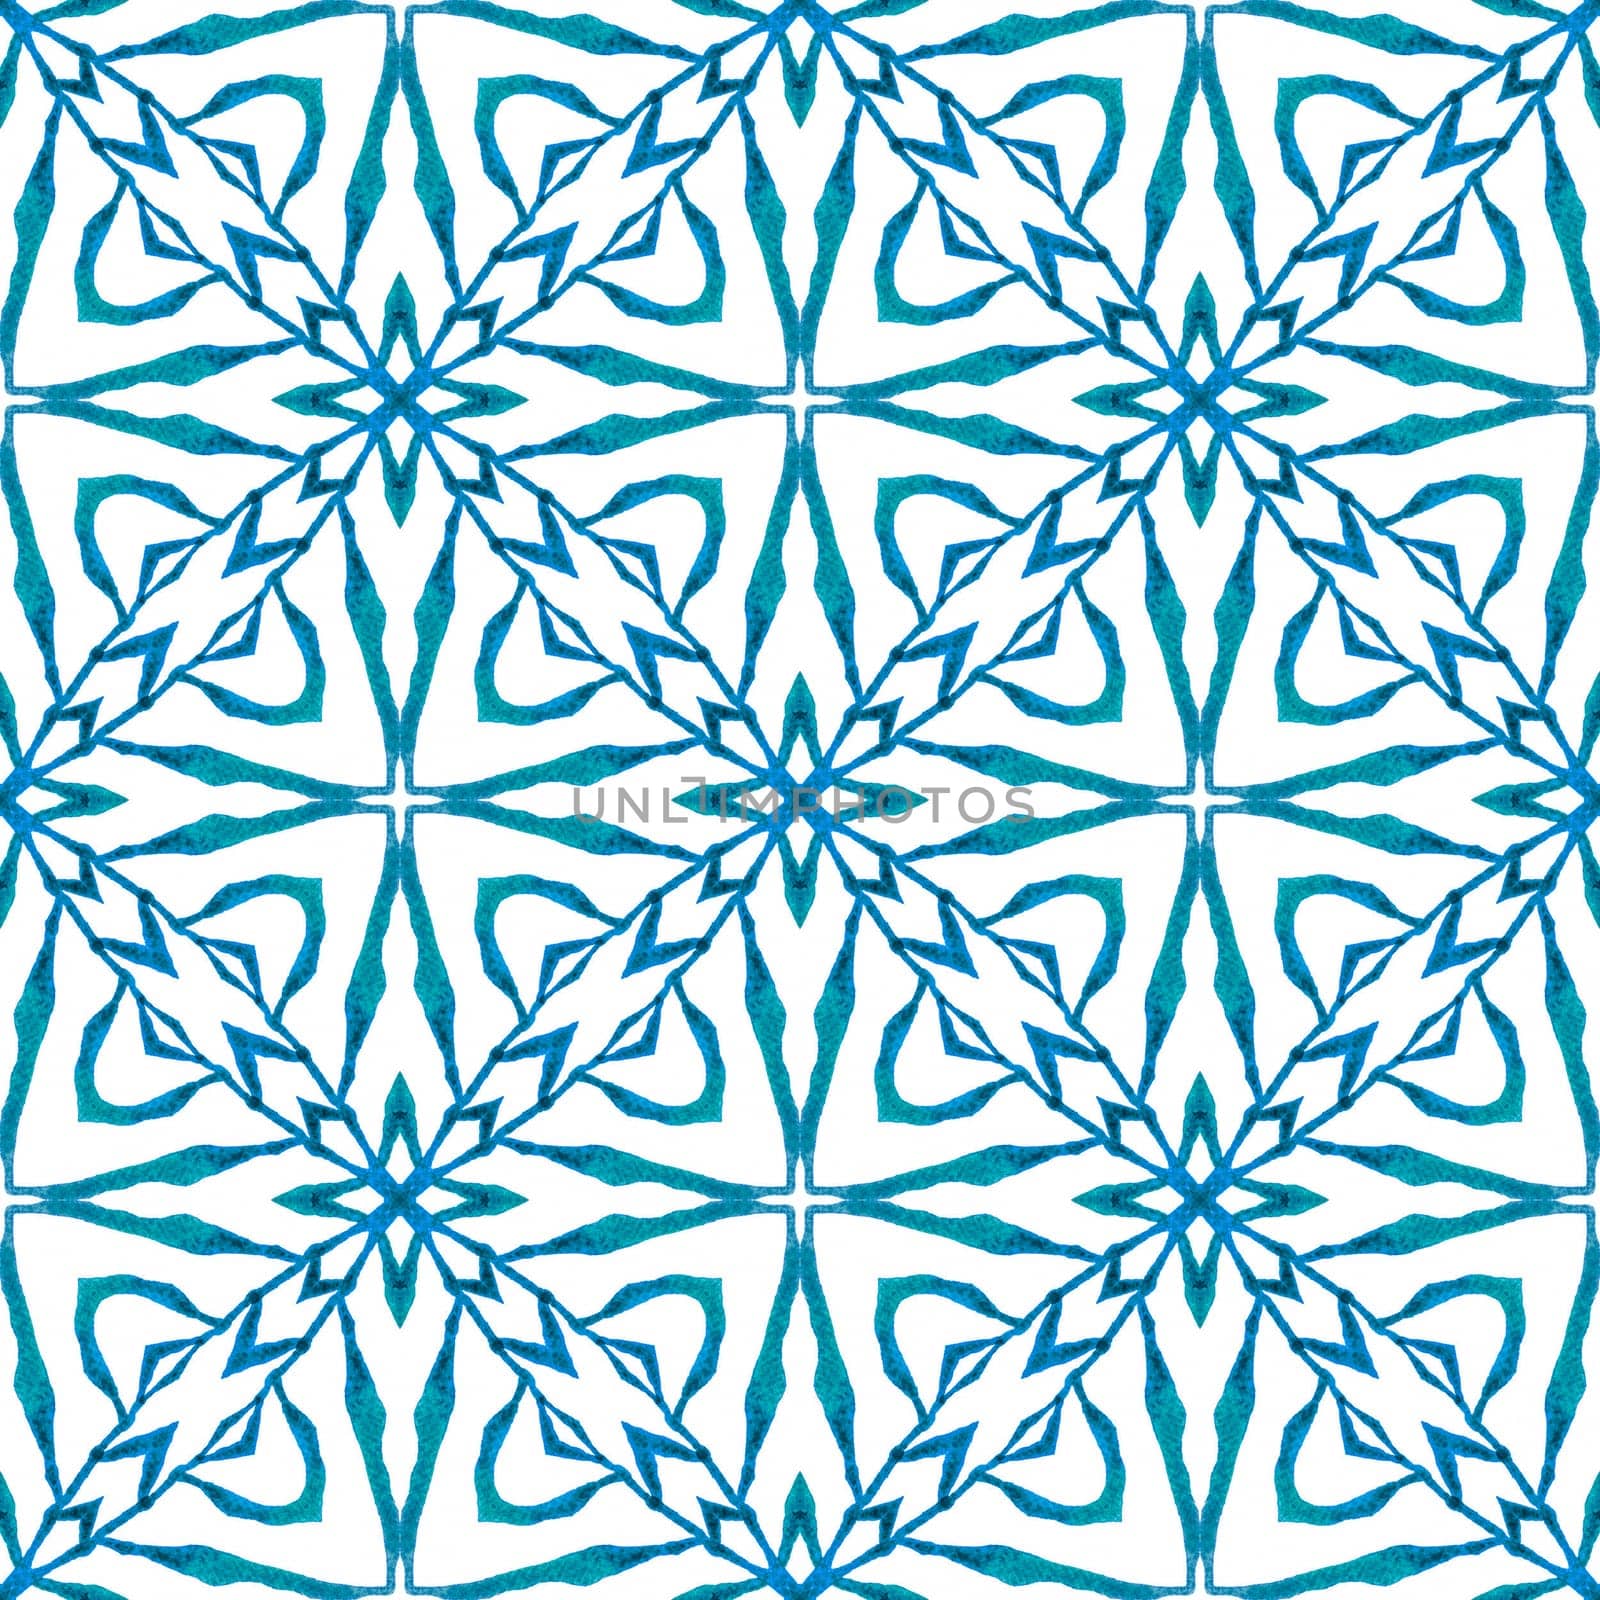 Tiled watercolor background. Blue symmetrical by beginagain